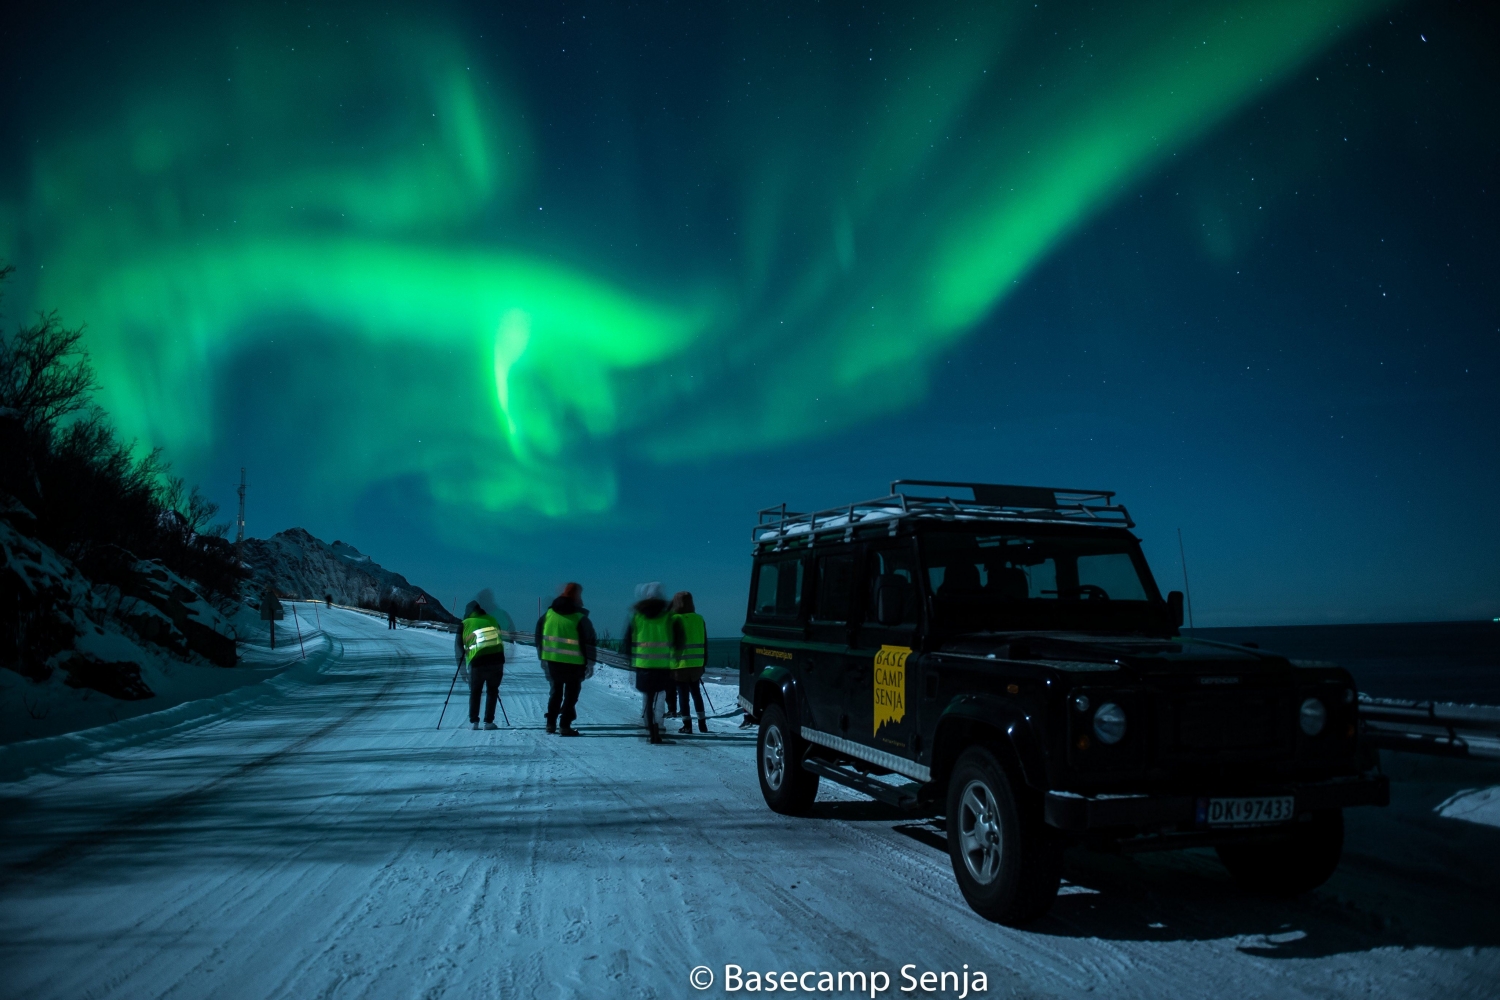 A truck and guests under the Northern Lights